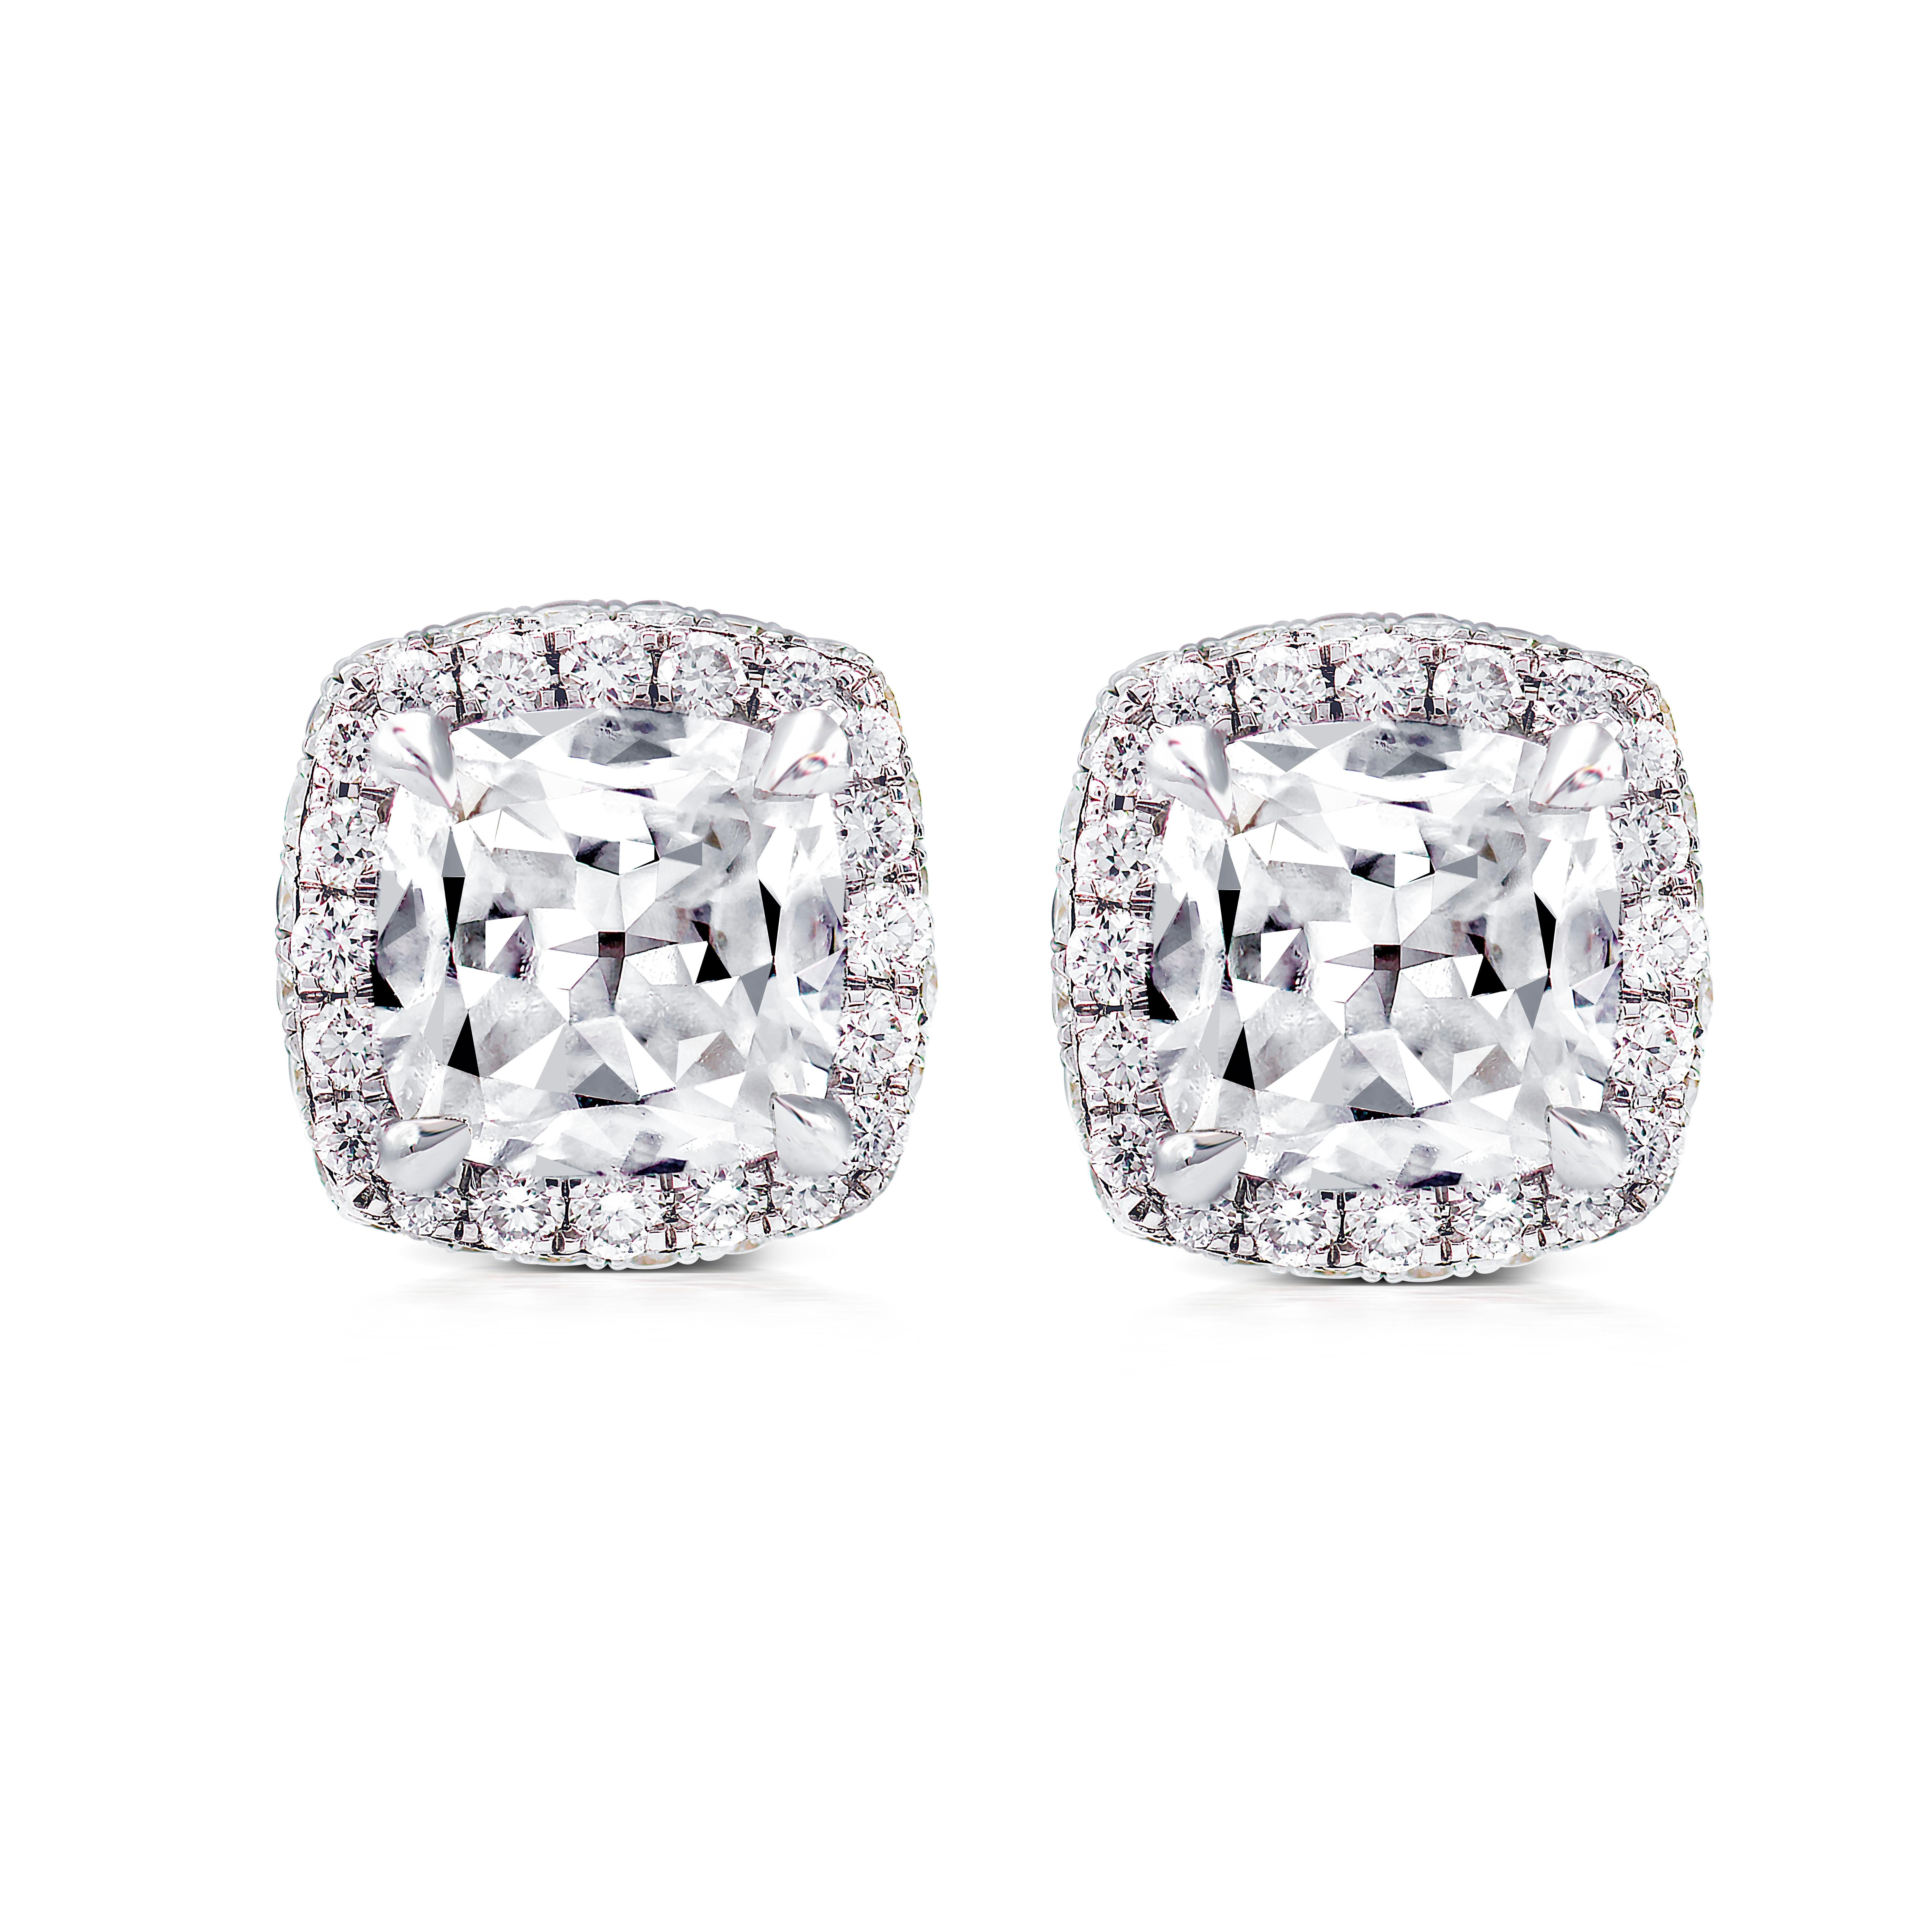 Contemporary 18k Gold 1.77 Carat Old Cut Cushion Diamond Halo Earrings Studs Earrings For Sale